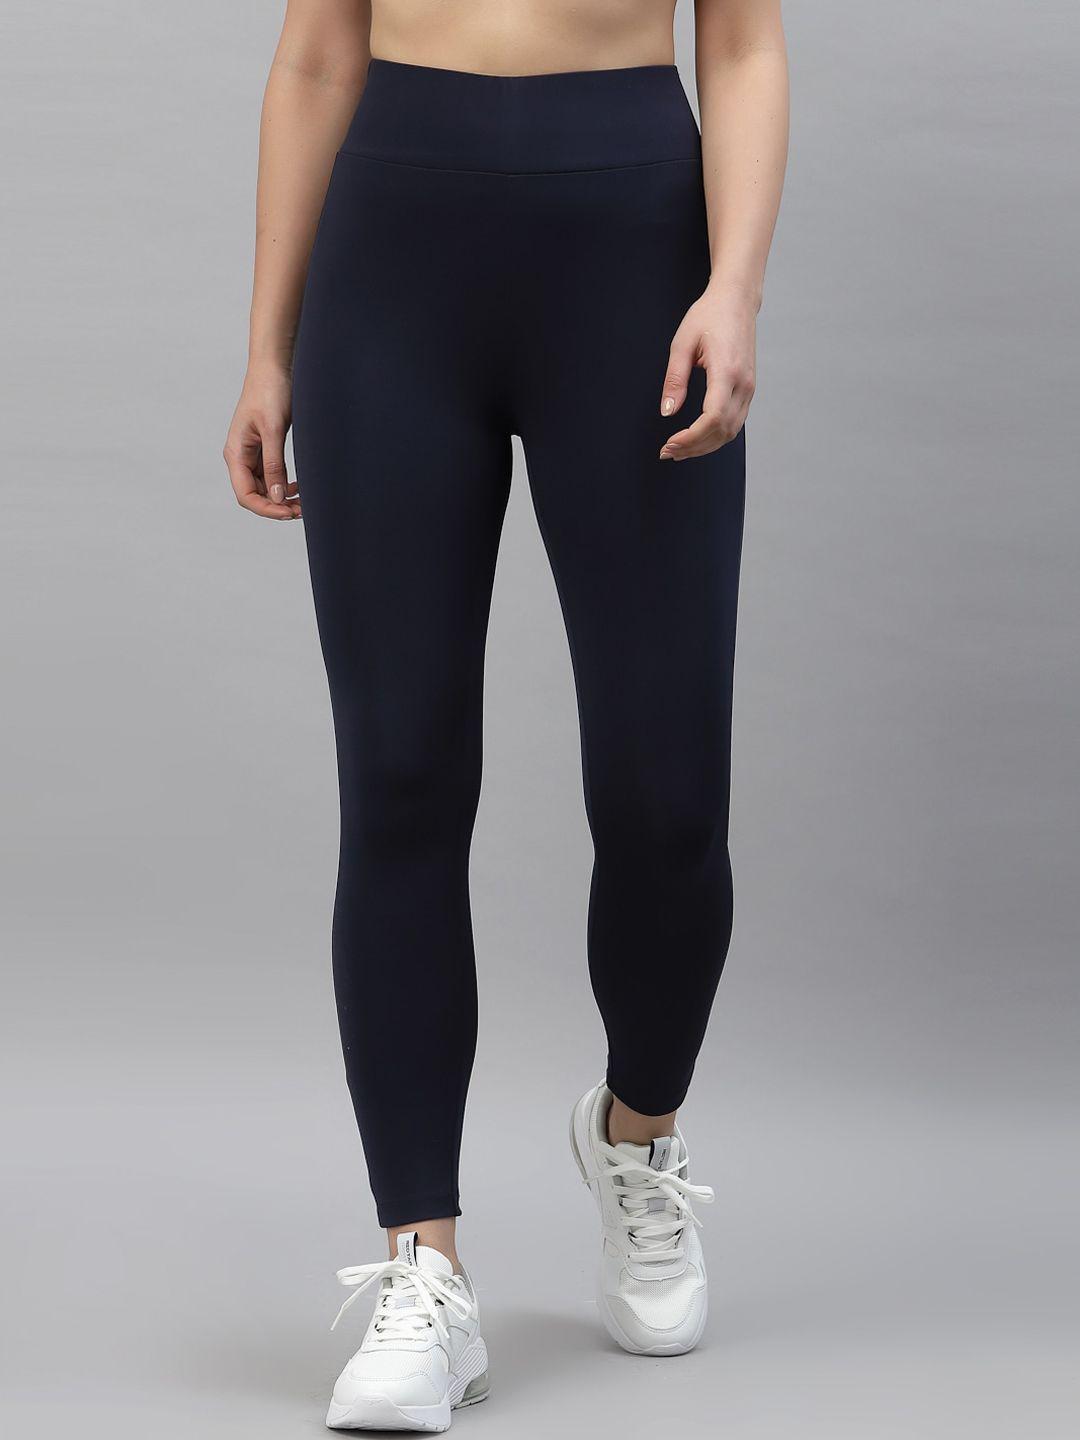 red tape women navy blue high waist solid activewear tights